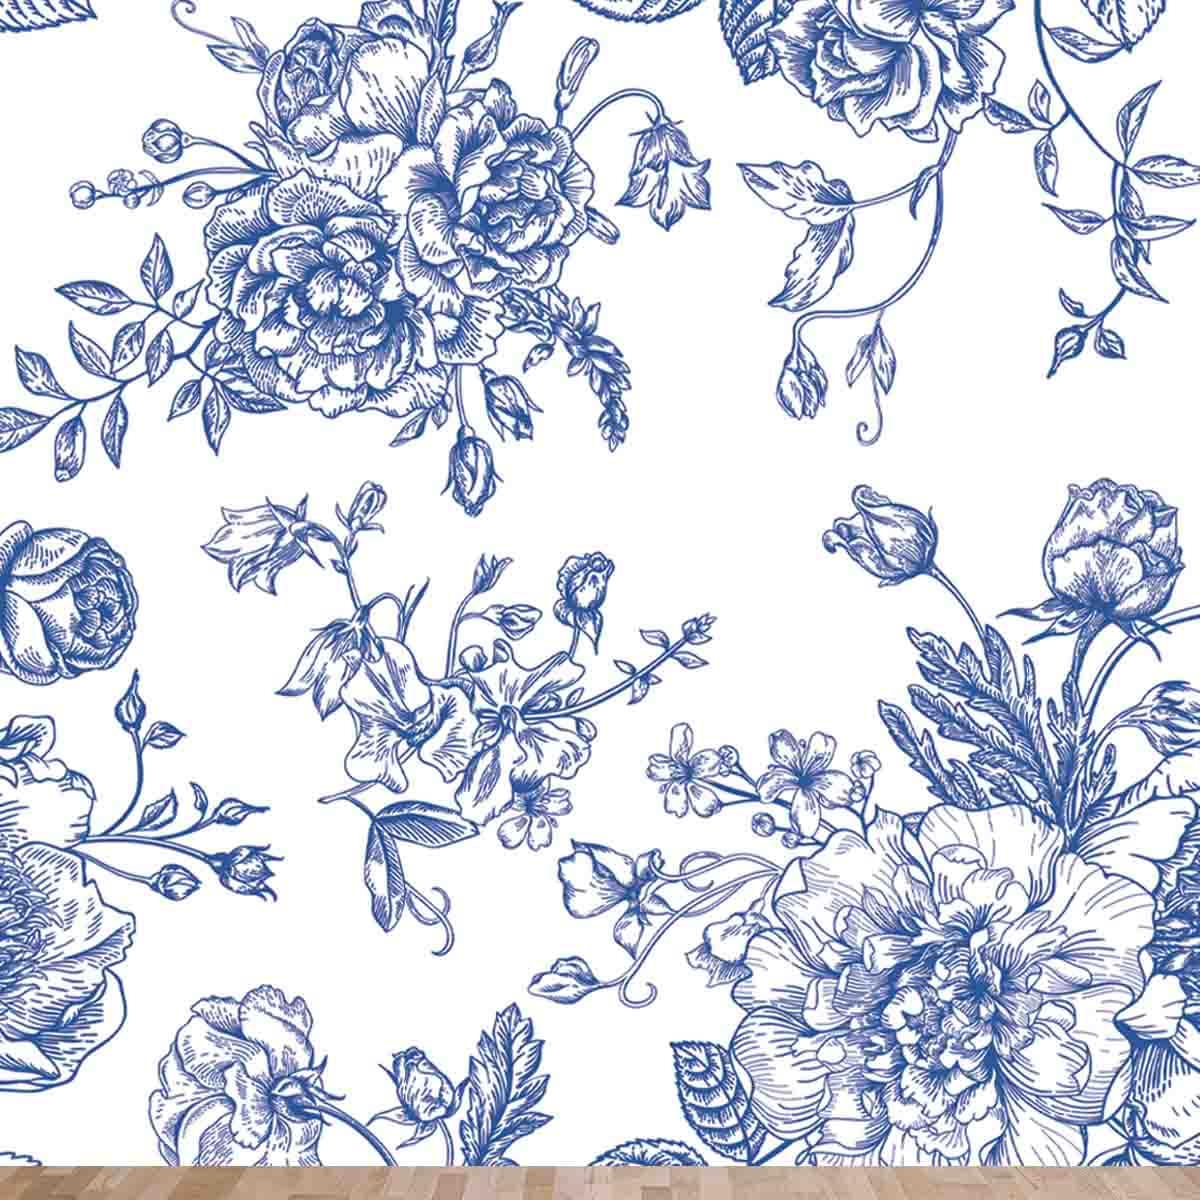 Vintage Pattern with Bouquet of Blue Flowers on a White Background Wallpaper Living Room Mural